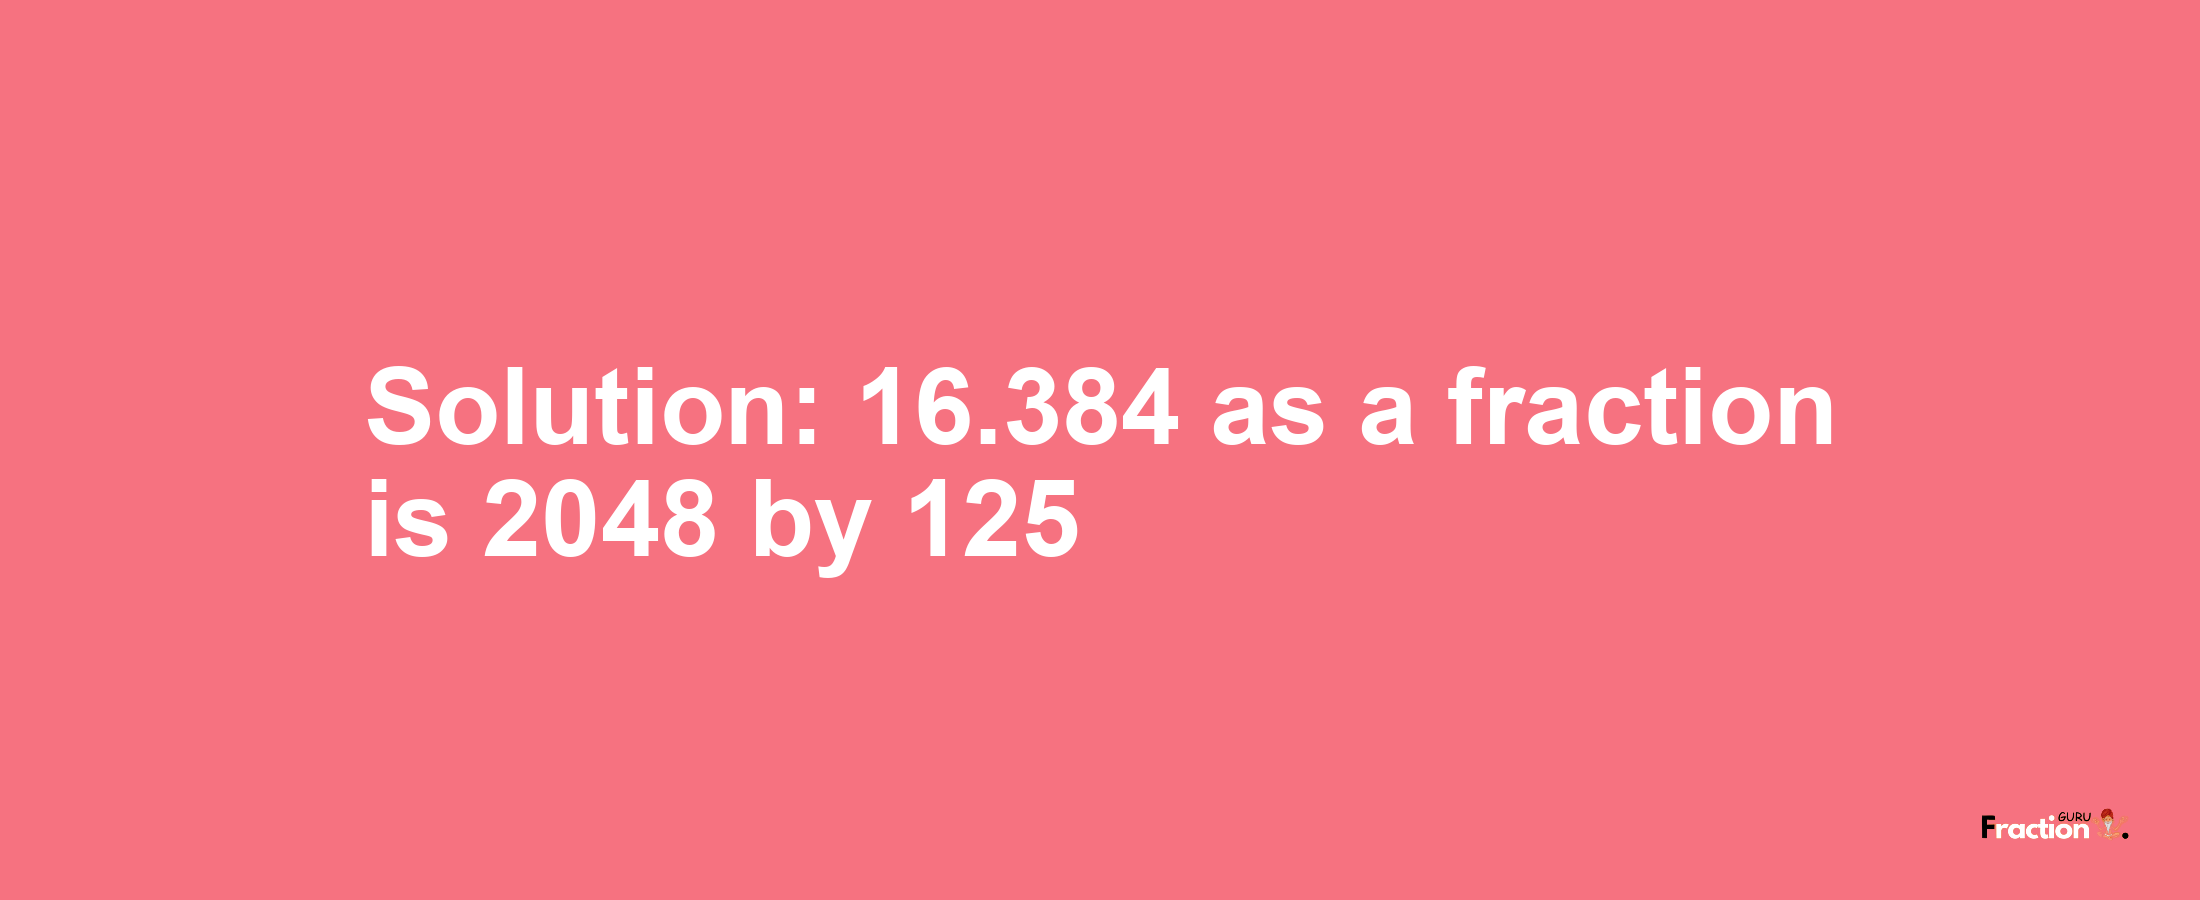 Solution:16.384 as a fraction is 2048/125